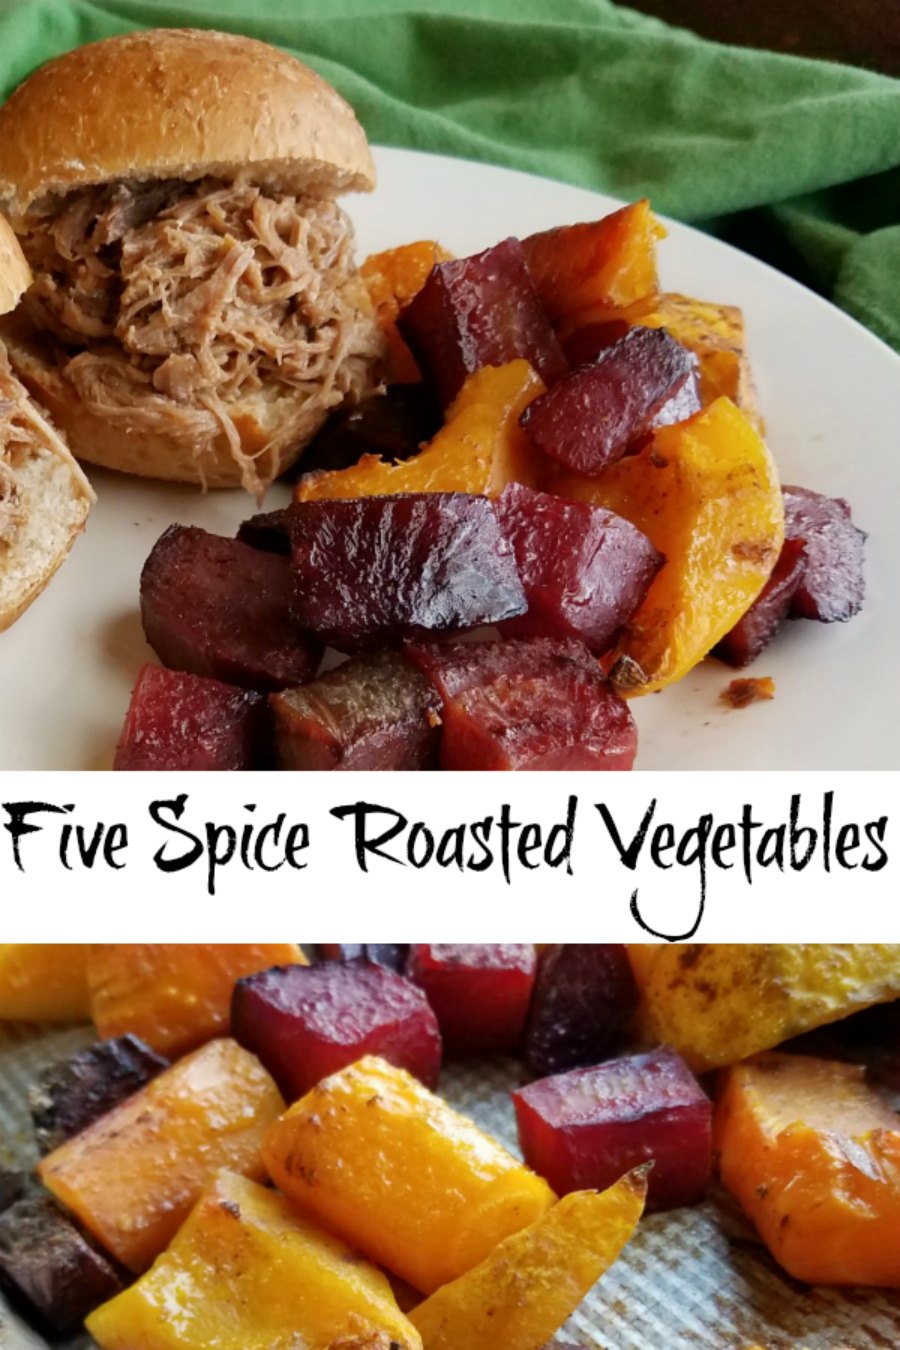 Roasted fall vegetables are made perfectly tender and lightly caramalized with a hint of Chinese five spice to give them that extra something. It’s a delicious fall side dish.